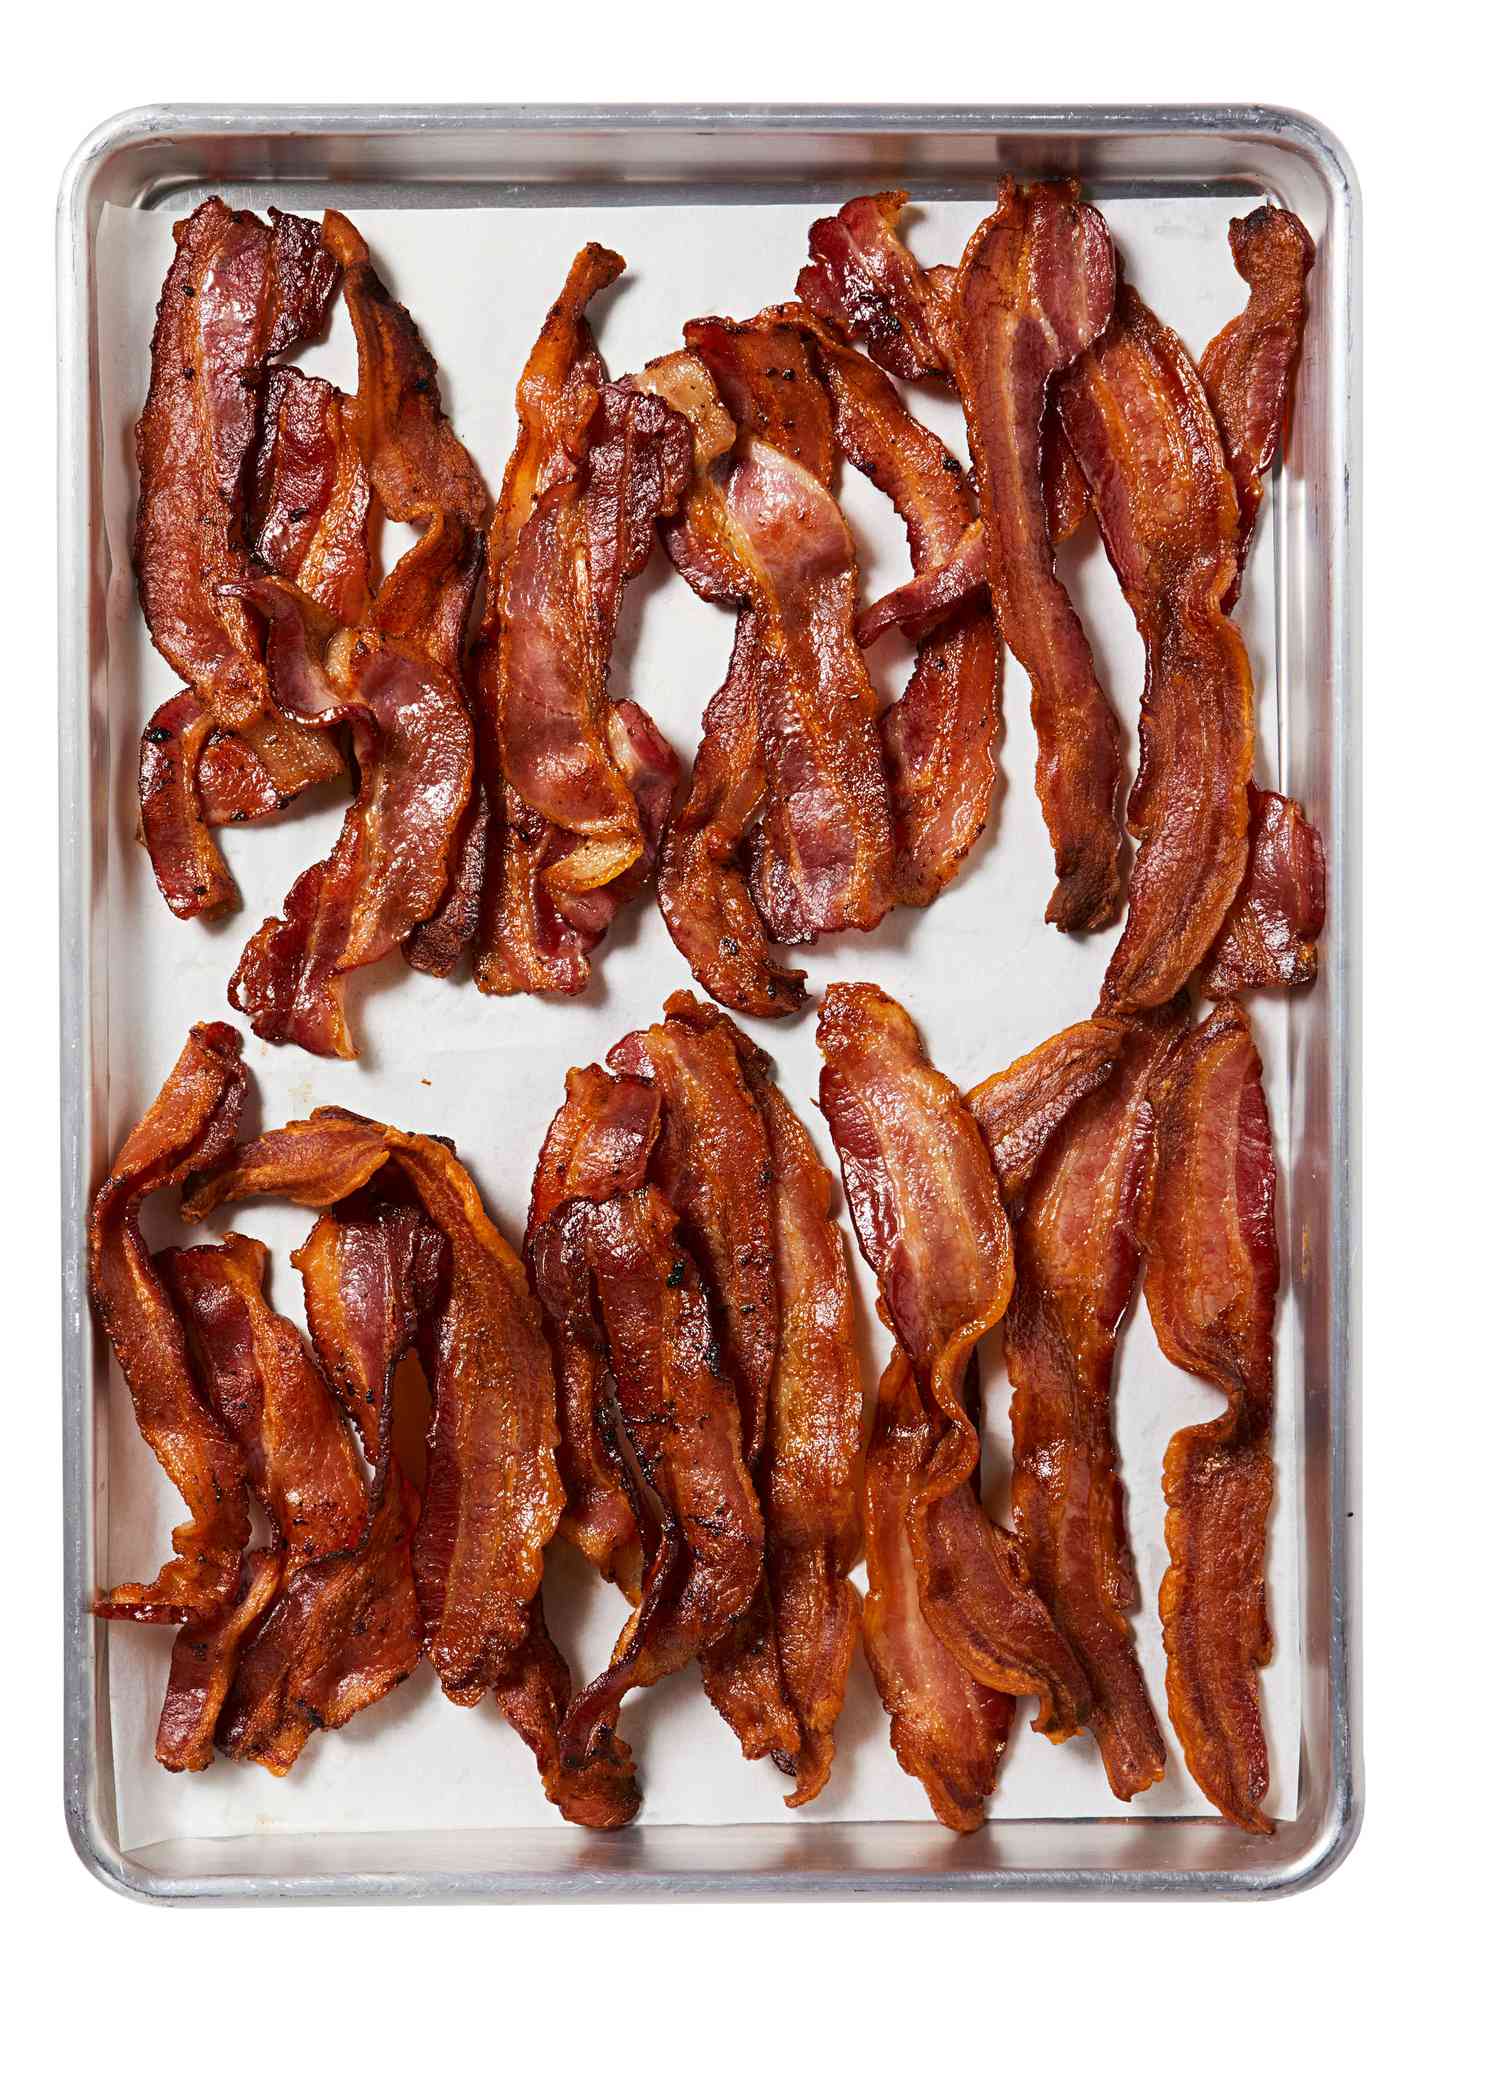 Less Mess Bacon How To Make Perfectly Crispy Bacon Without Tons Of Grease Spatter Martha Stewart,Chameleon Petco